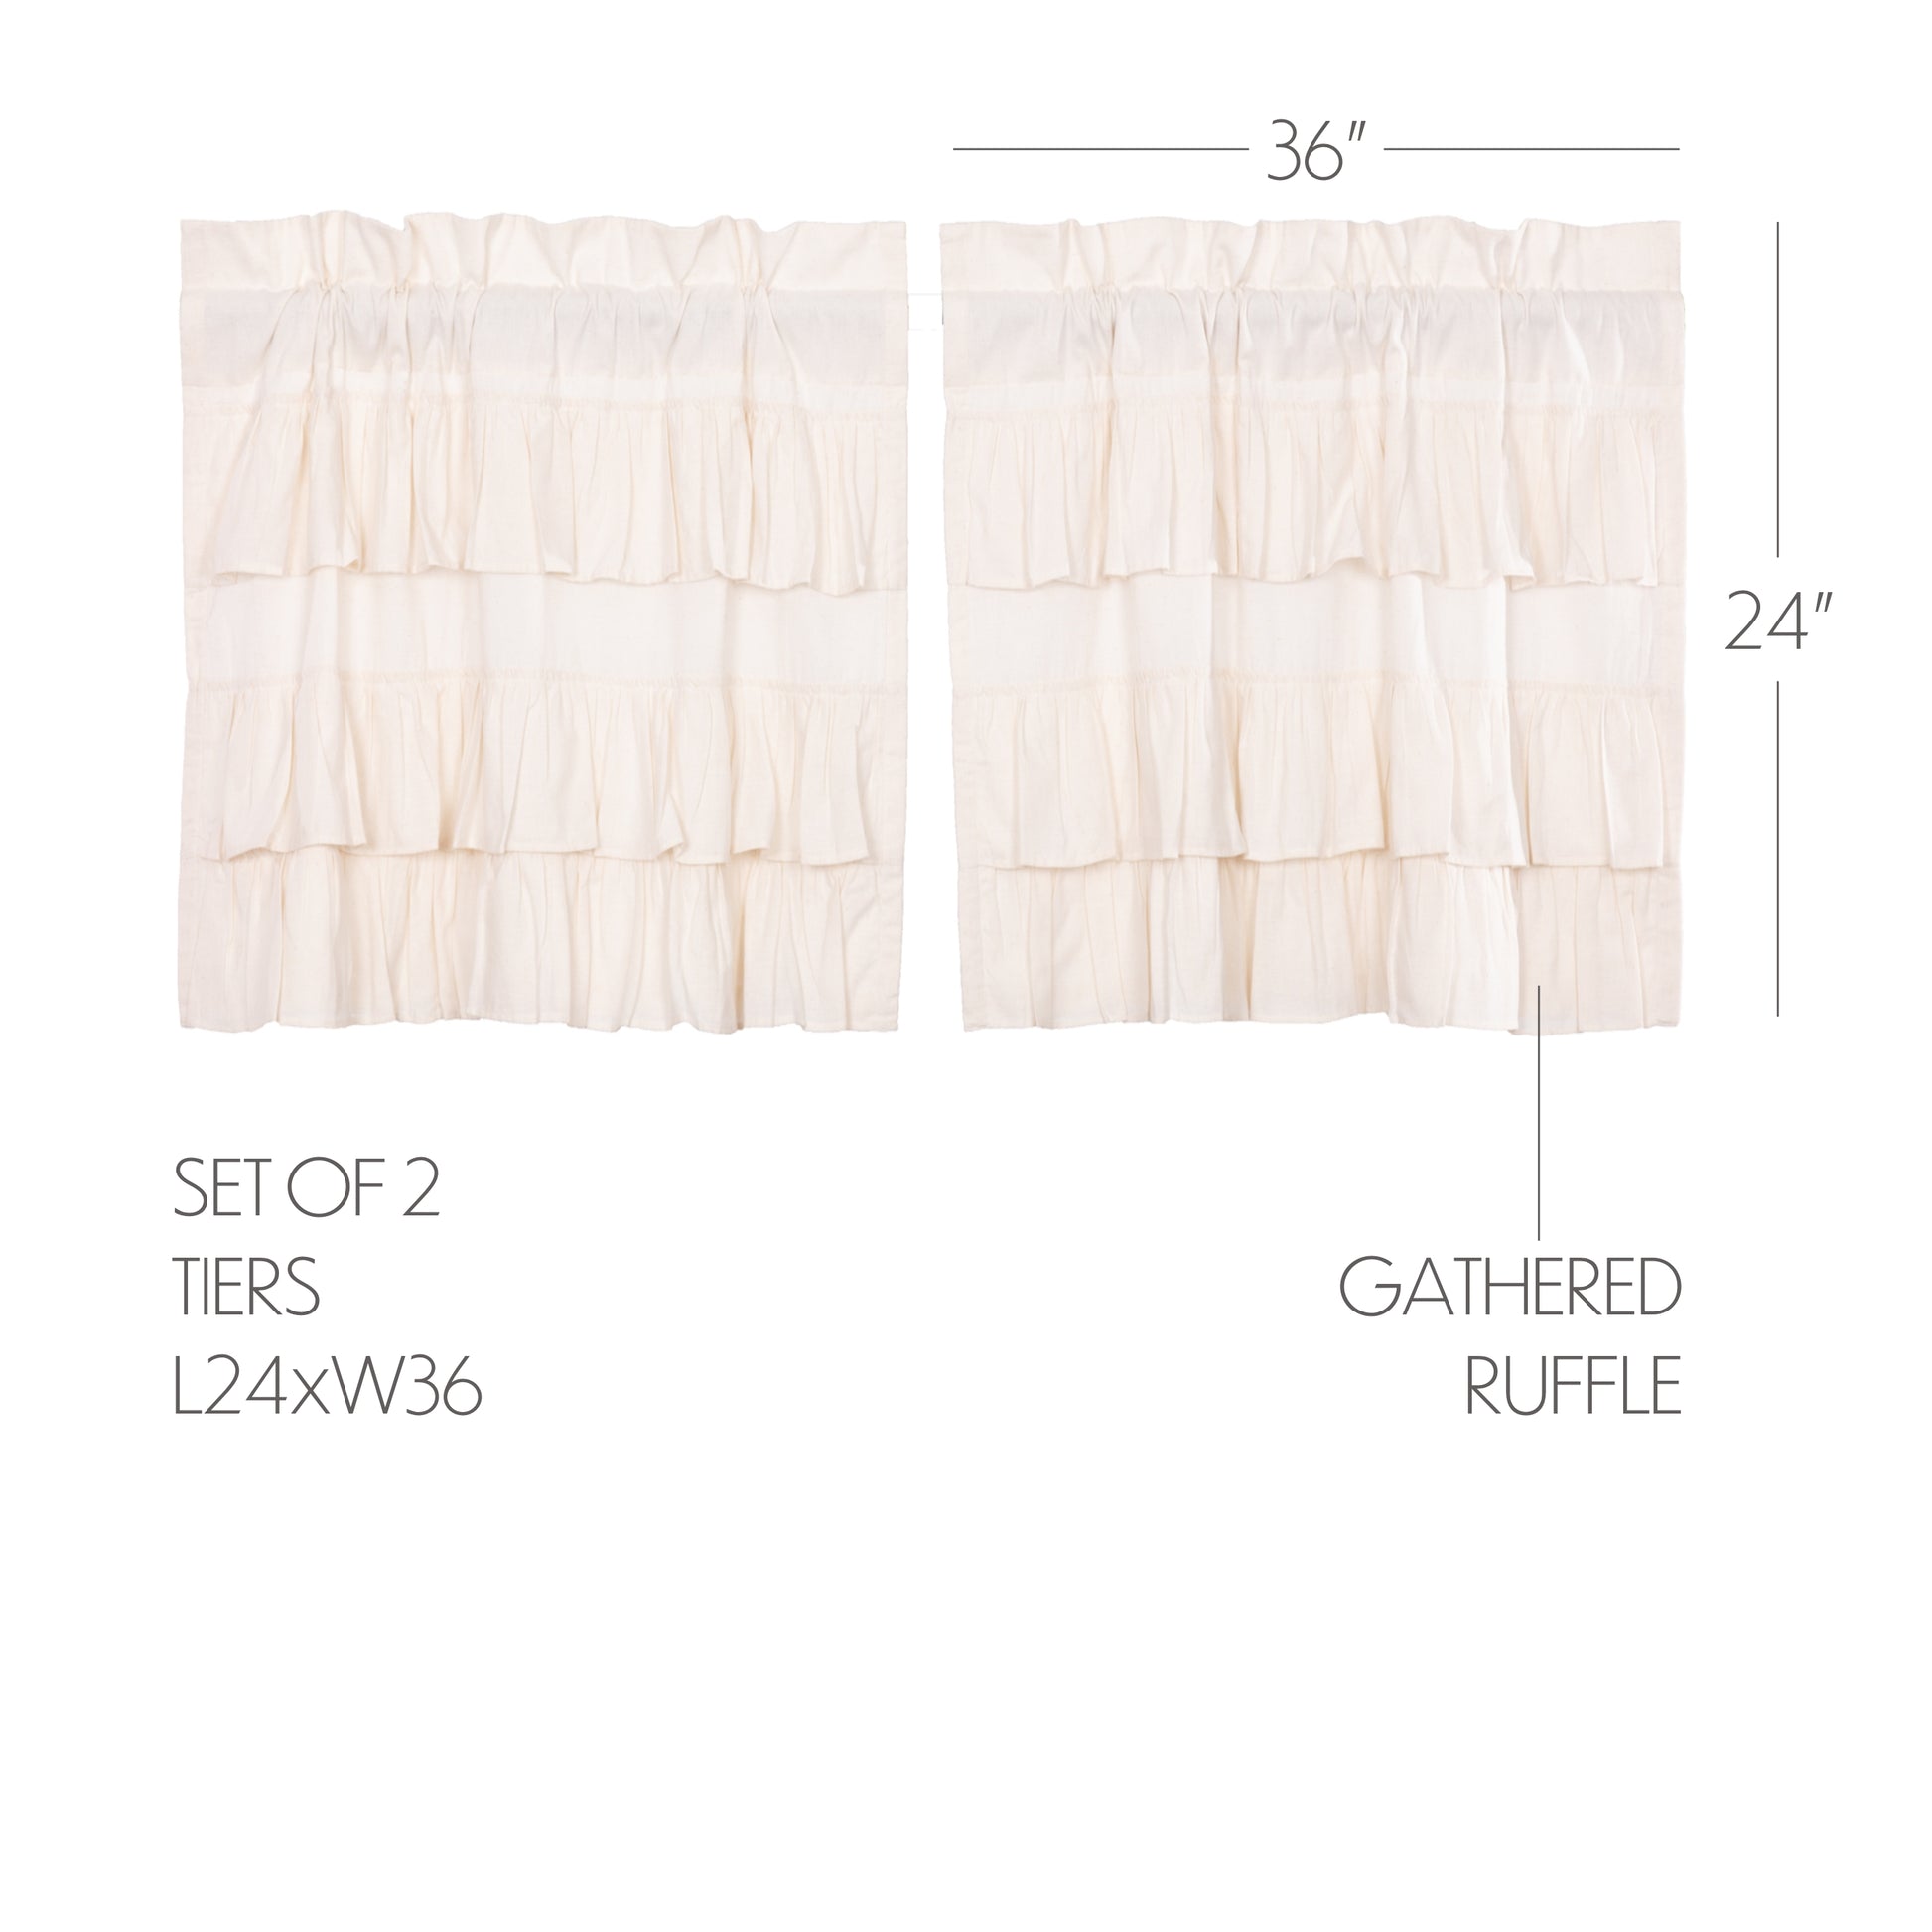 51981-Simple-Life-Flax-Antique-White-Ruffled-Tier-Set-of-2-L24xW36-image-1